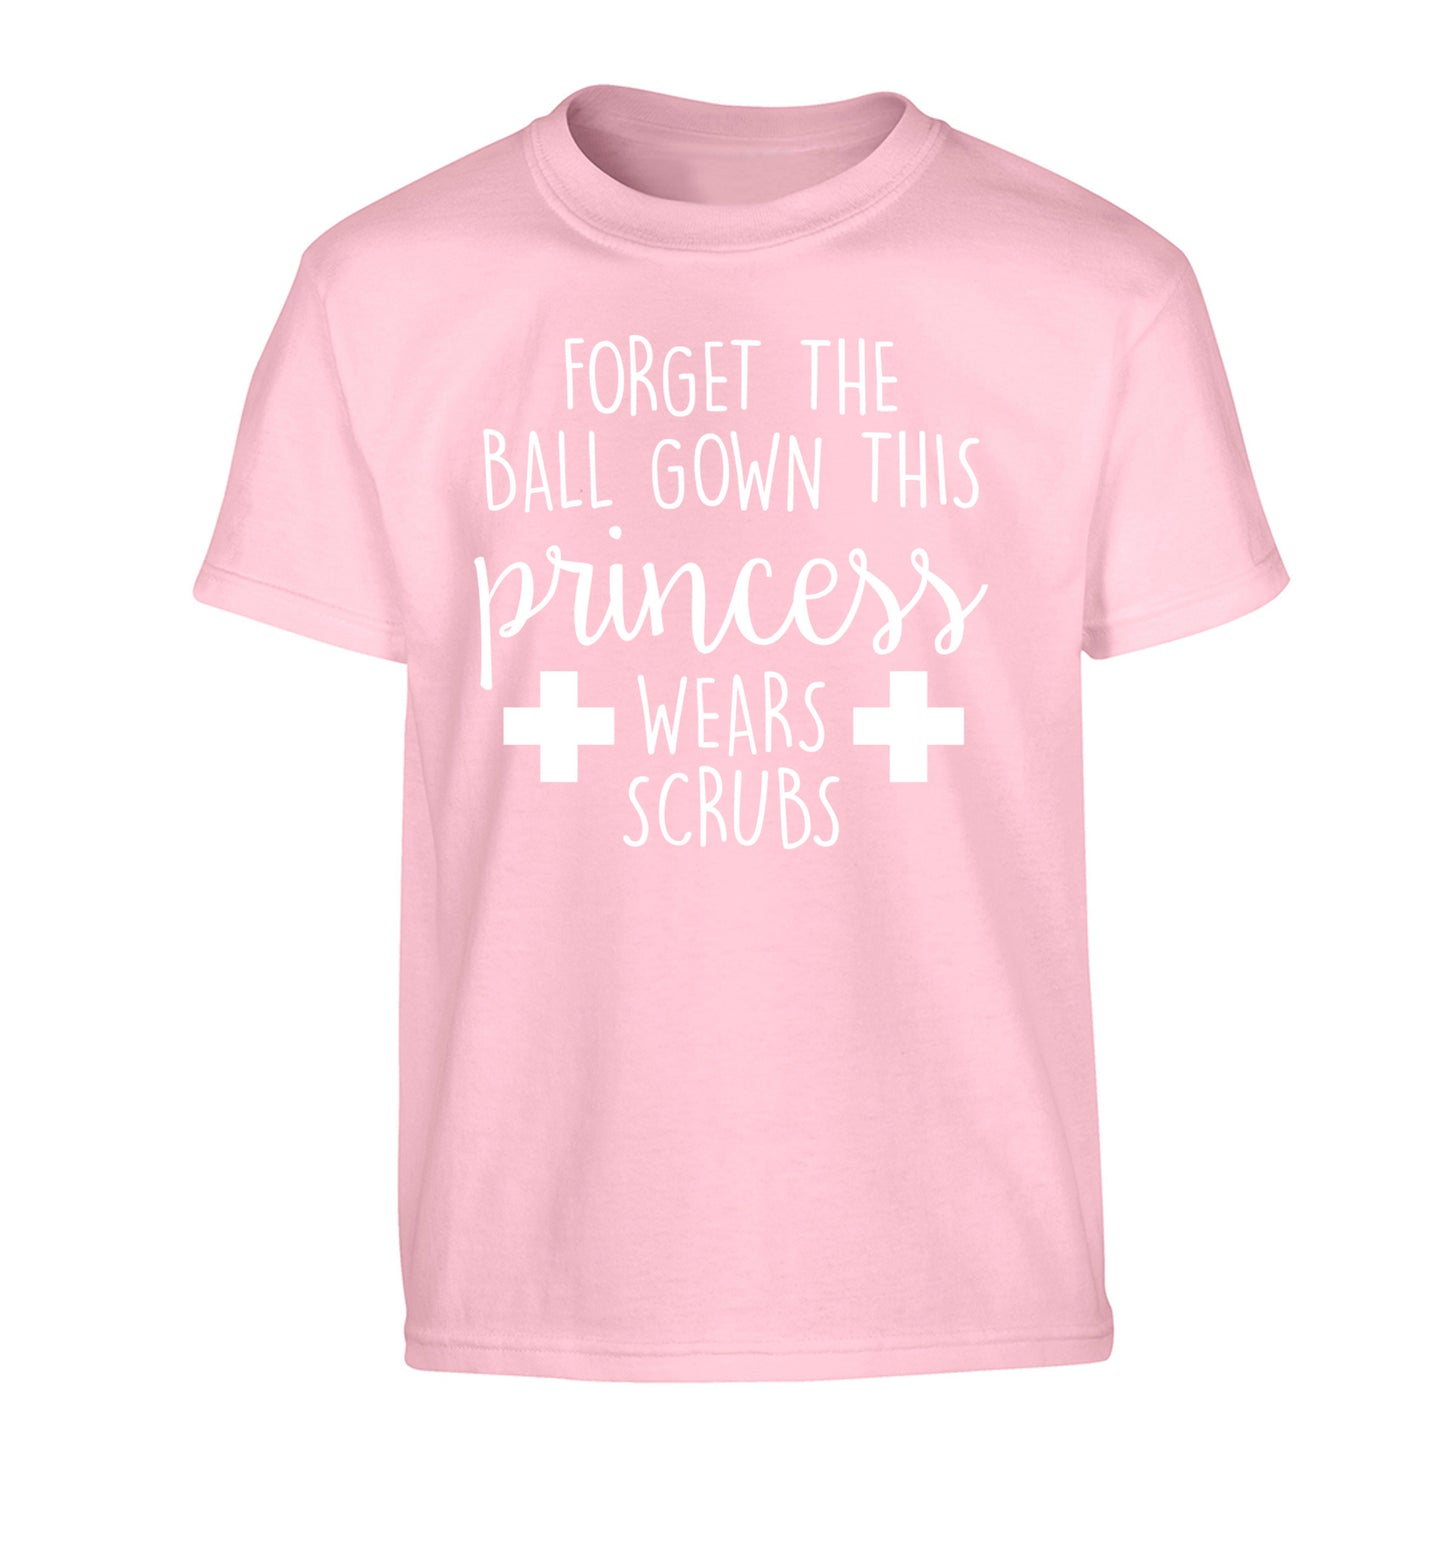 Forget the ball gown this princess wears scrubs Children's light pink Tshirt 12-14 Years